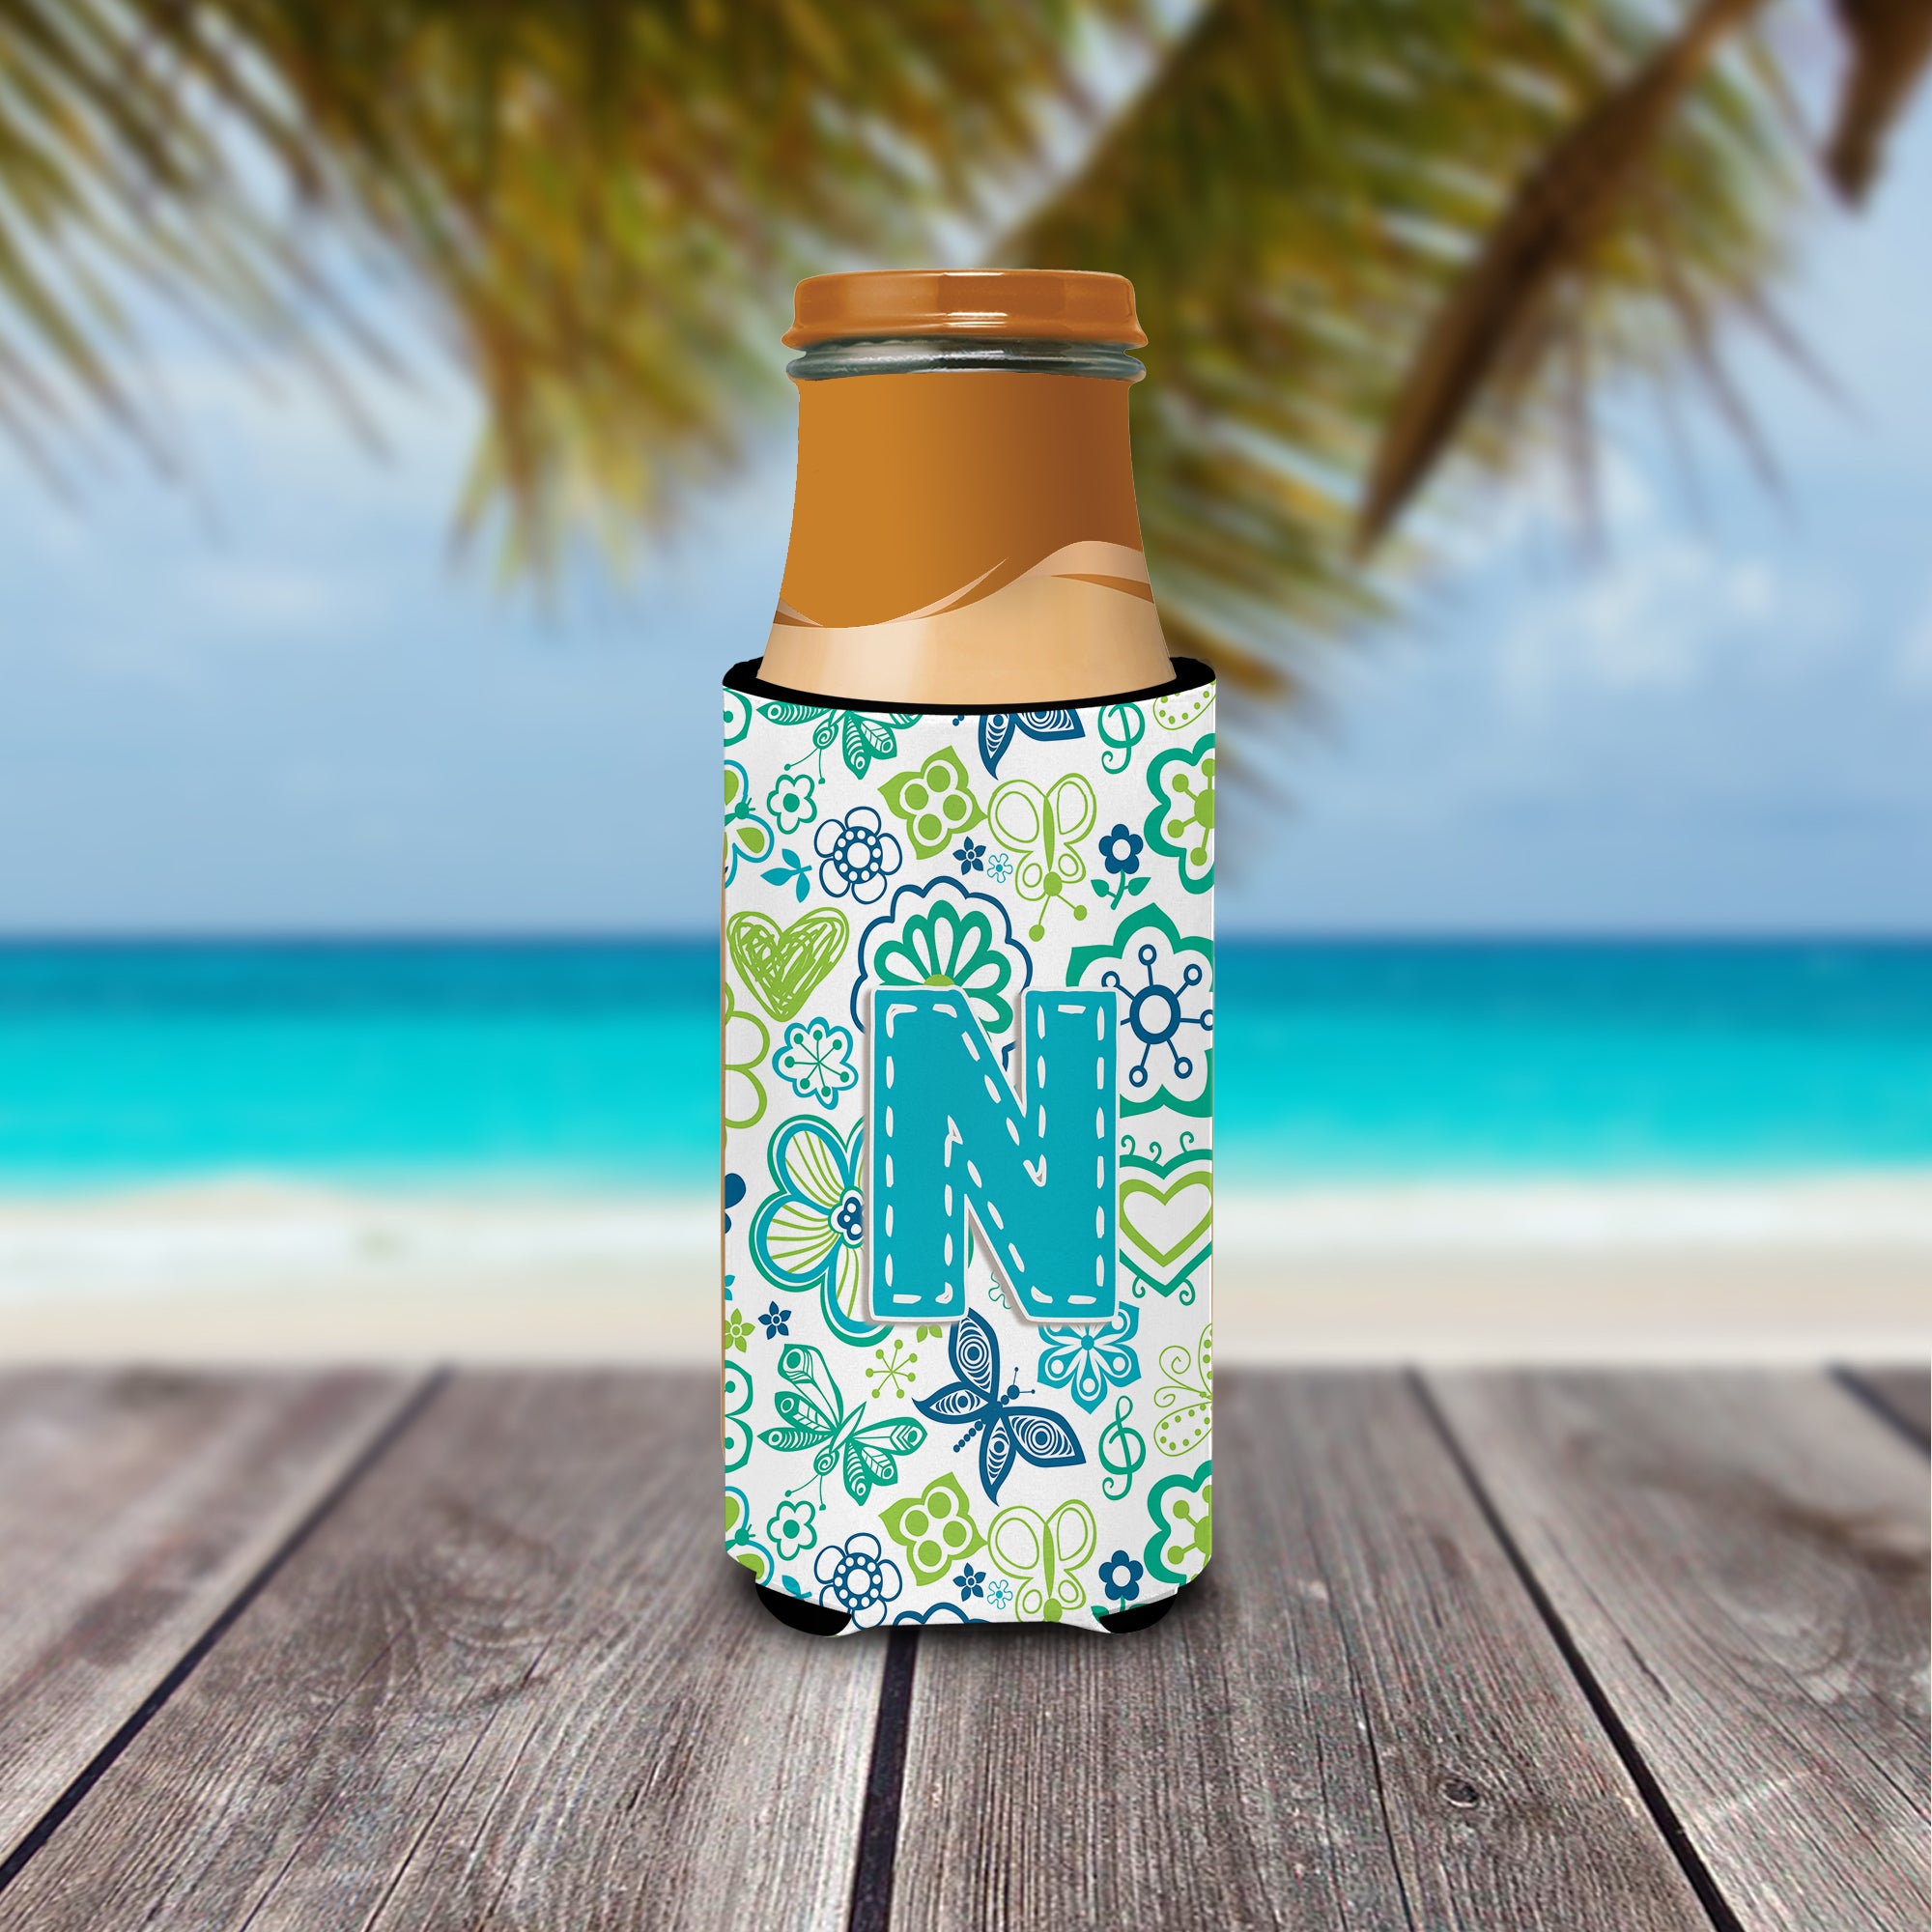 Letter N Flowers and Butterflies Teal Blue Ultra Beverage Insulators for slim cans CJ2006-NMUK.